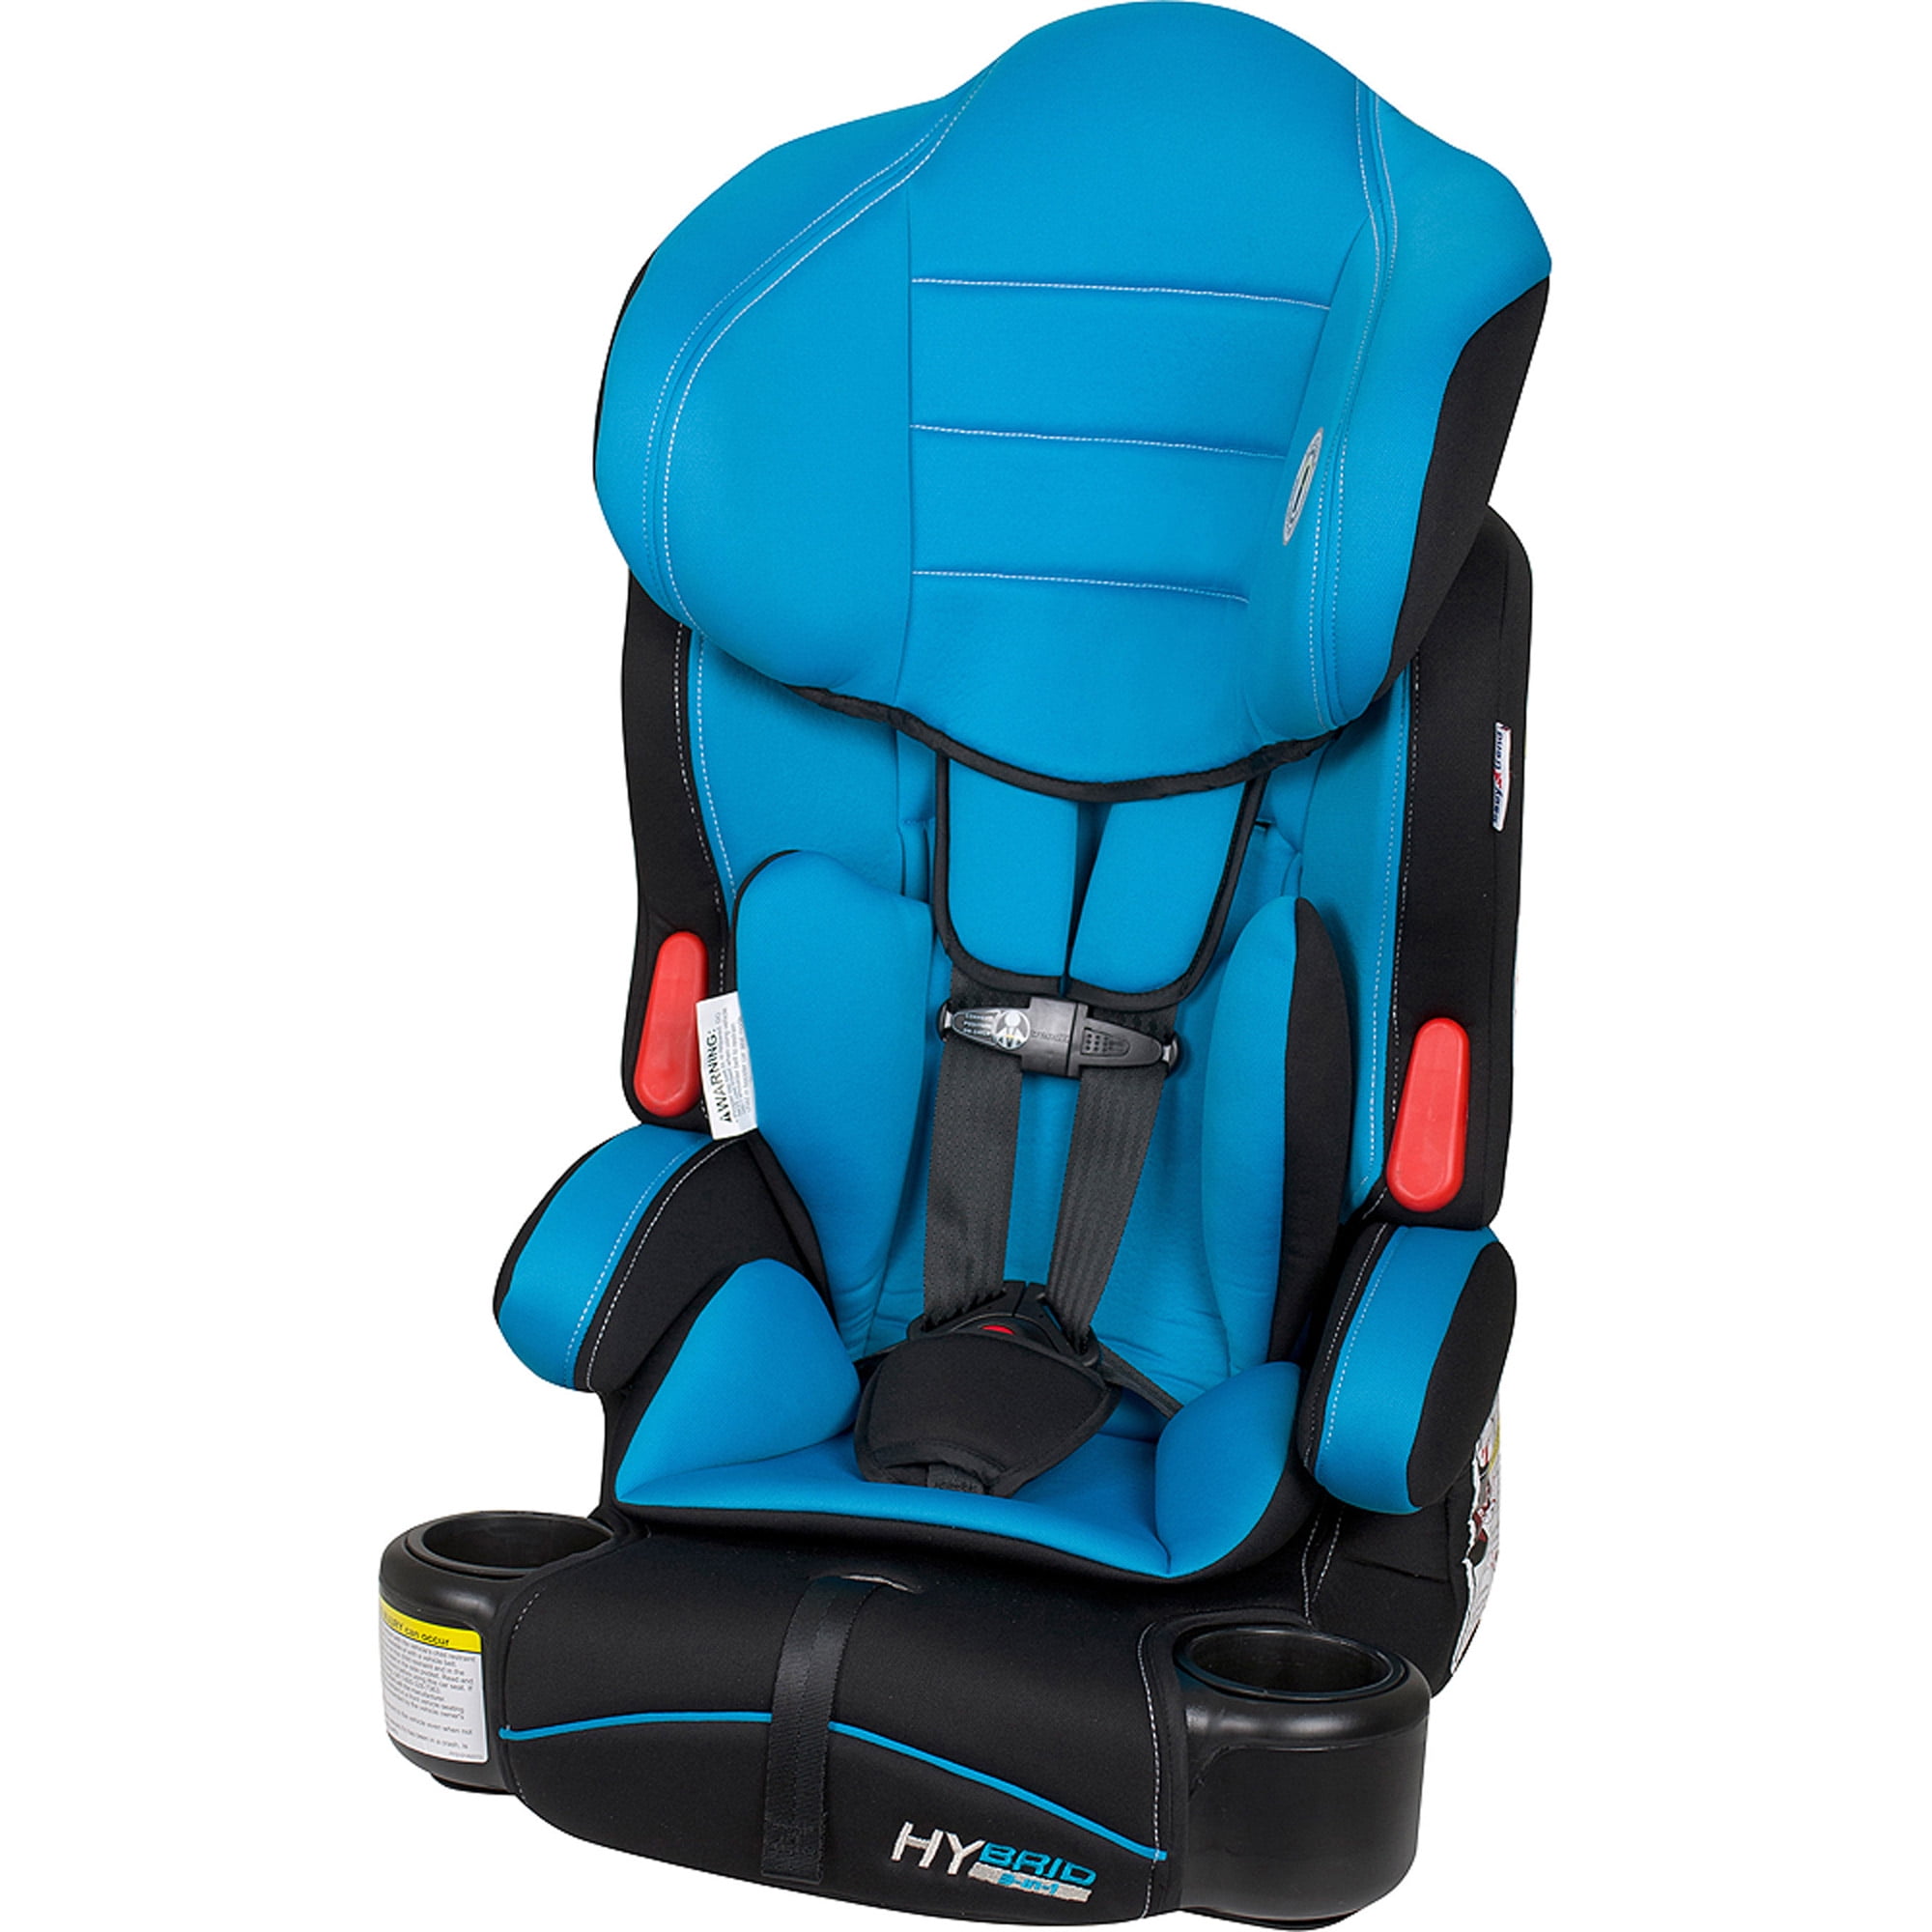 BABY BOOSTER CAR SEAT 3-in-1 5-Point Safety Padded Harness Light Blue 